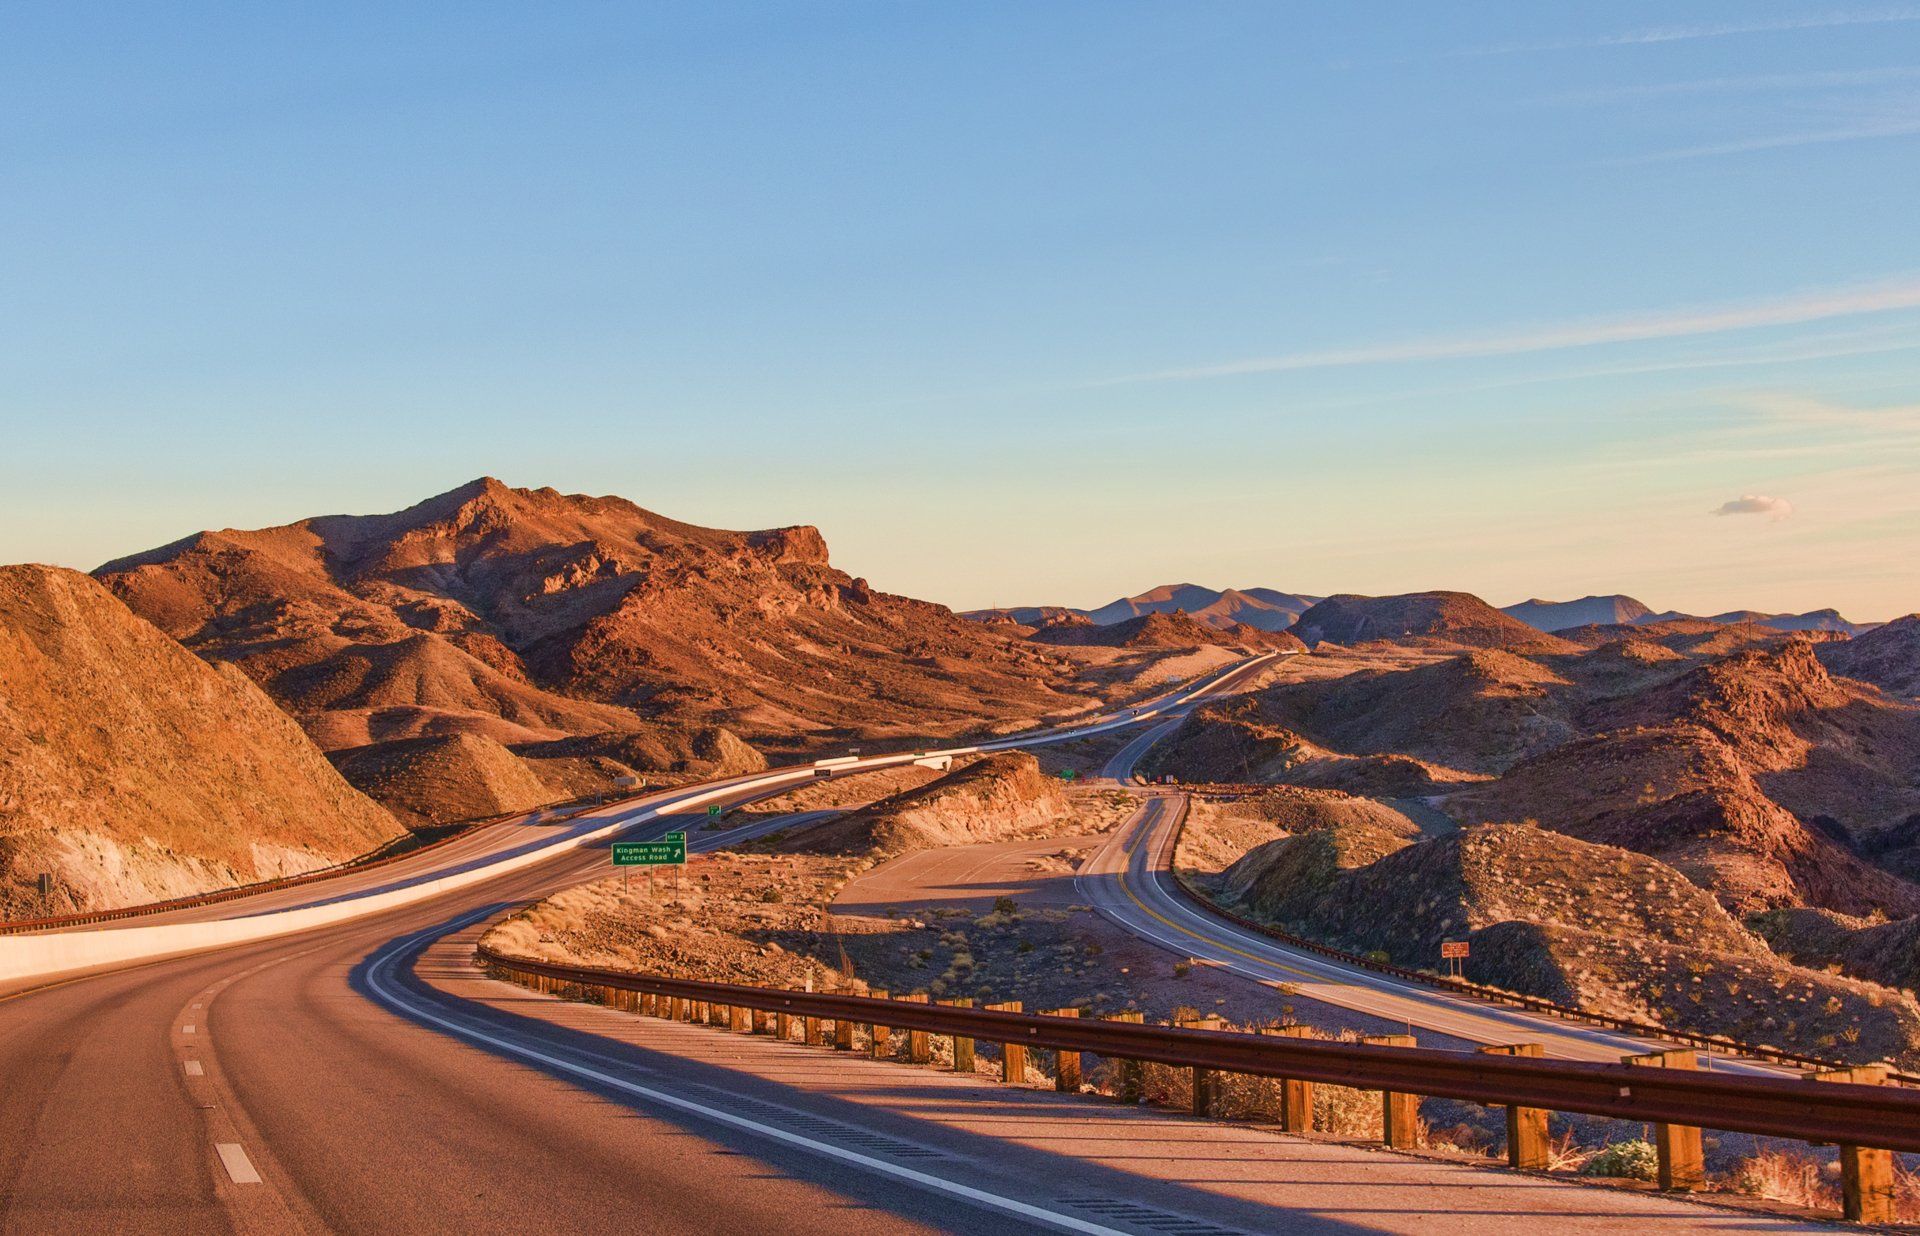 a highway going through a desert landscape with mountains in the background .